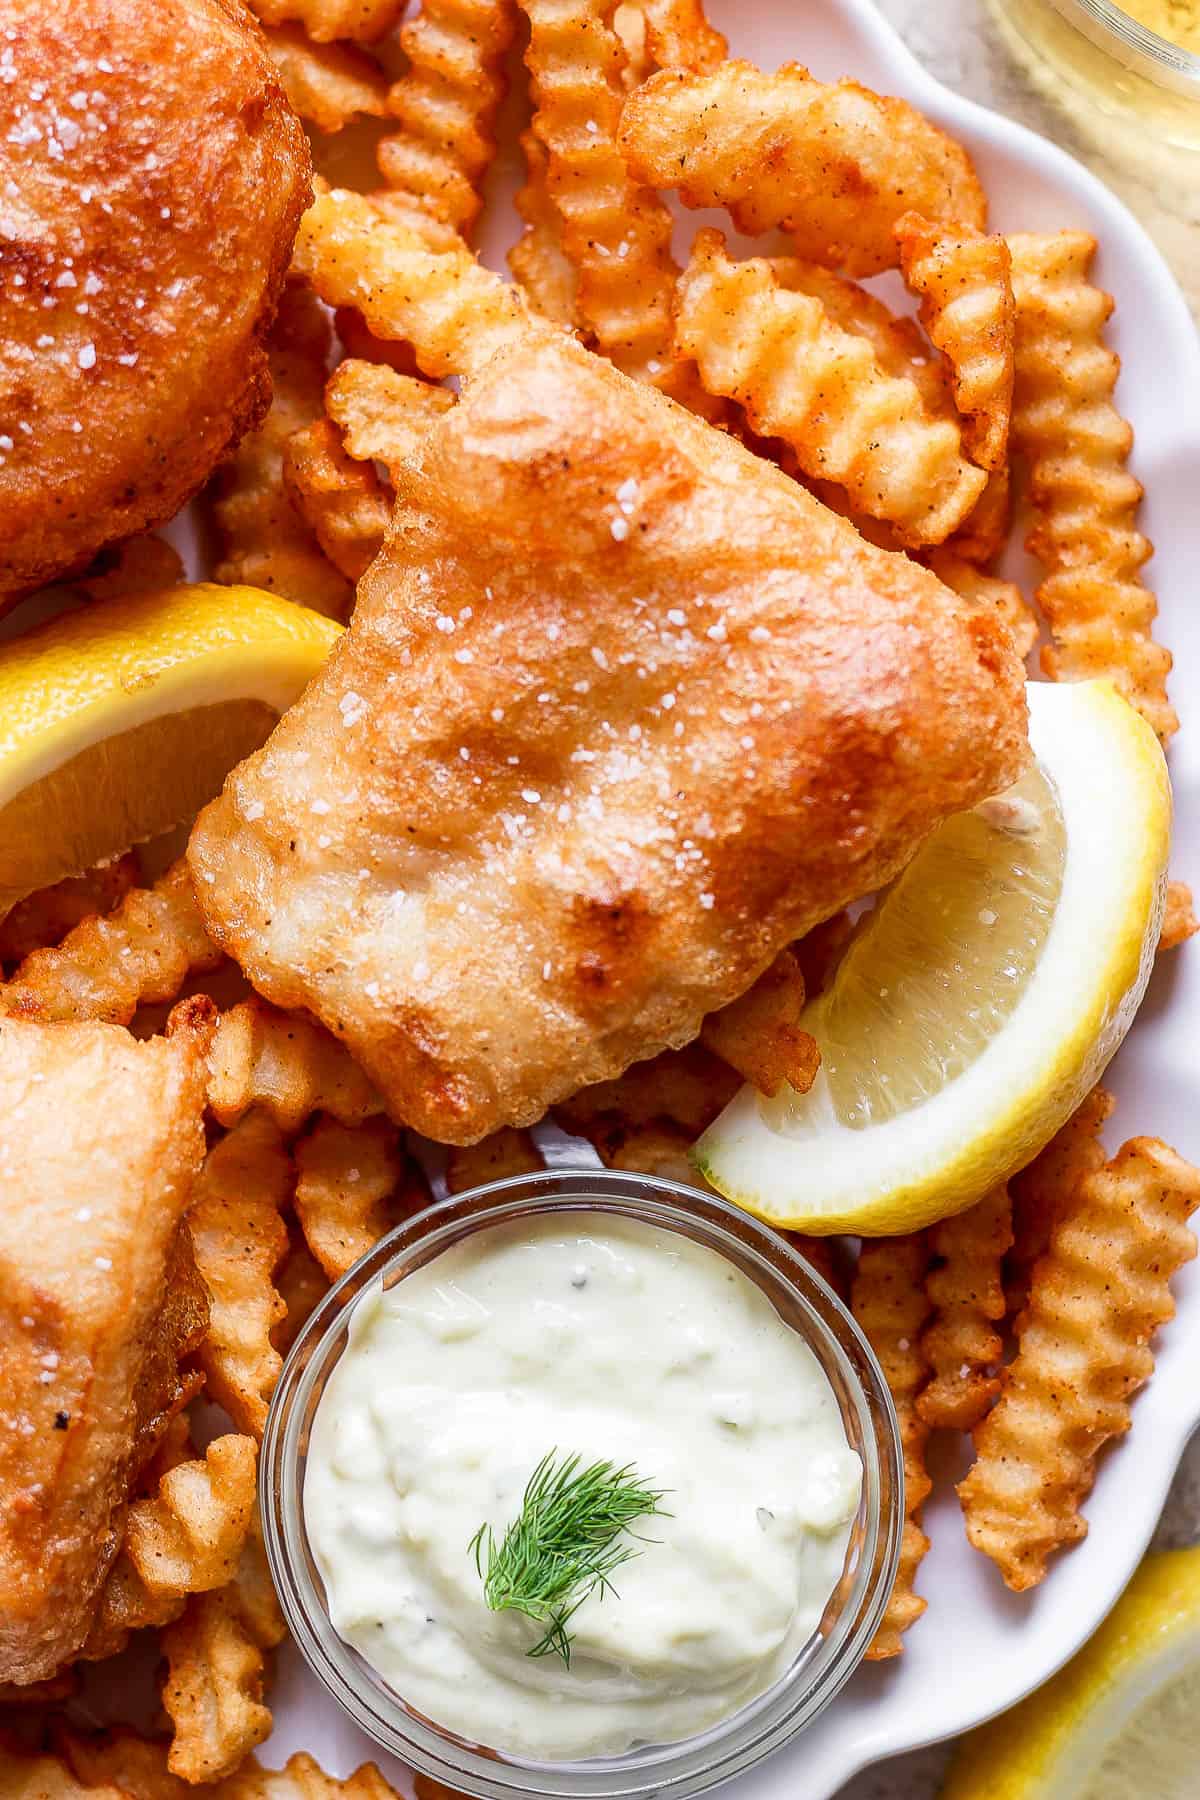 Beer battered fish on a plate with french fries, tartar sauce, and lemon wedges.